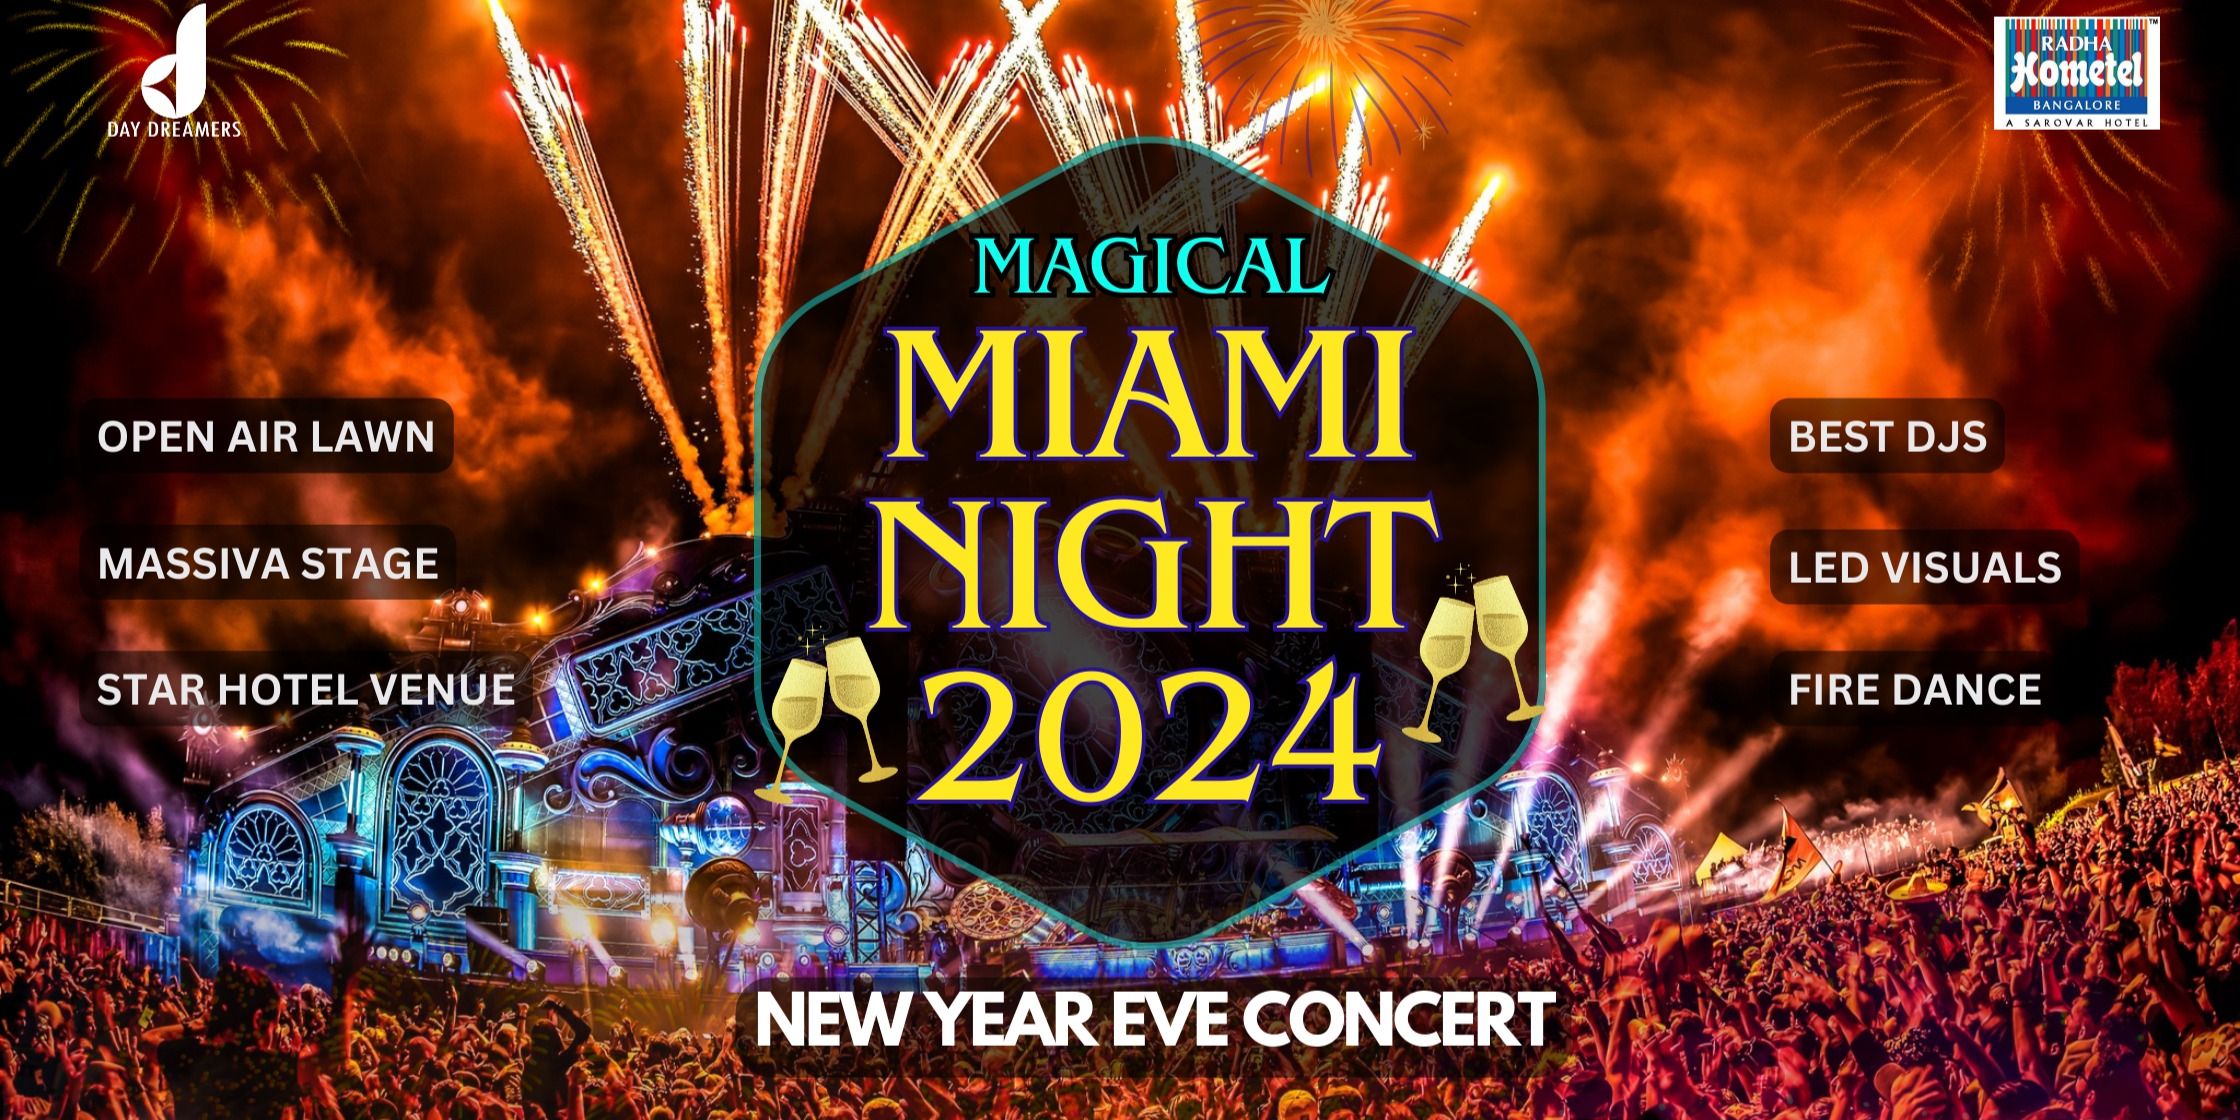 Magical Miami Night 2024 – A New Year Eve Concert